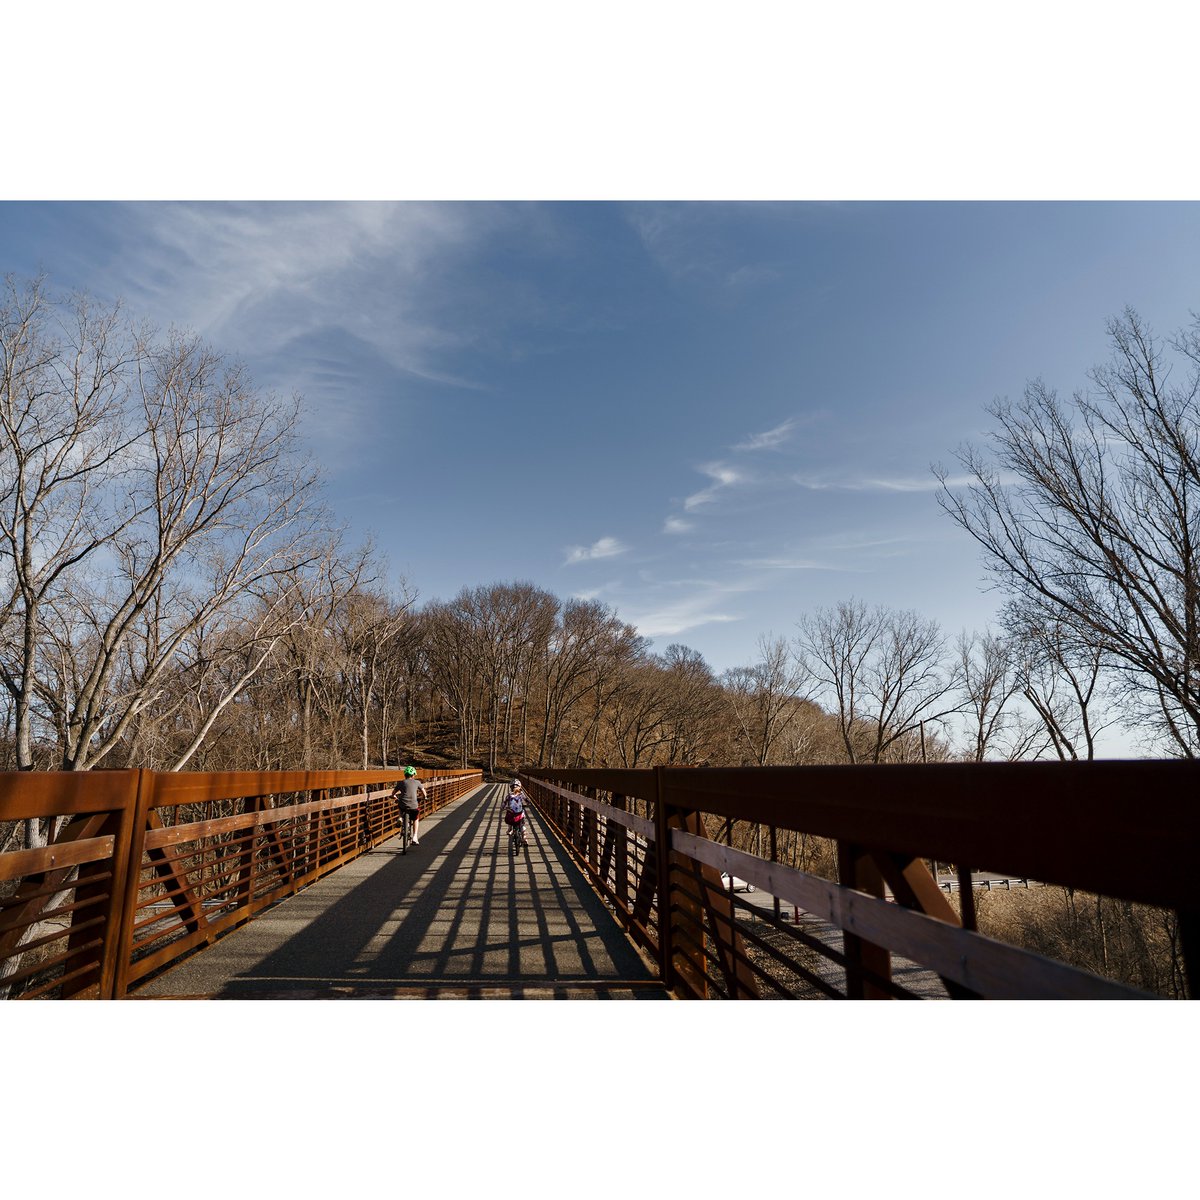 What are our plans this holiday weekend?  Walking the Bob, of course 👌
The Bob Simpson Pedestrian Bridge is easily accessed from the McArthur Drive parking lot and Huston Wyeth Hill.
📸 Bountiful Eye Photography
#riverblufftrails #stjosephmo #visitmo #trailcity